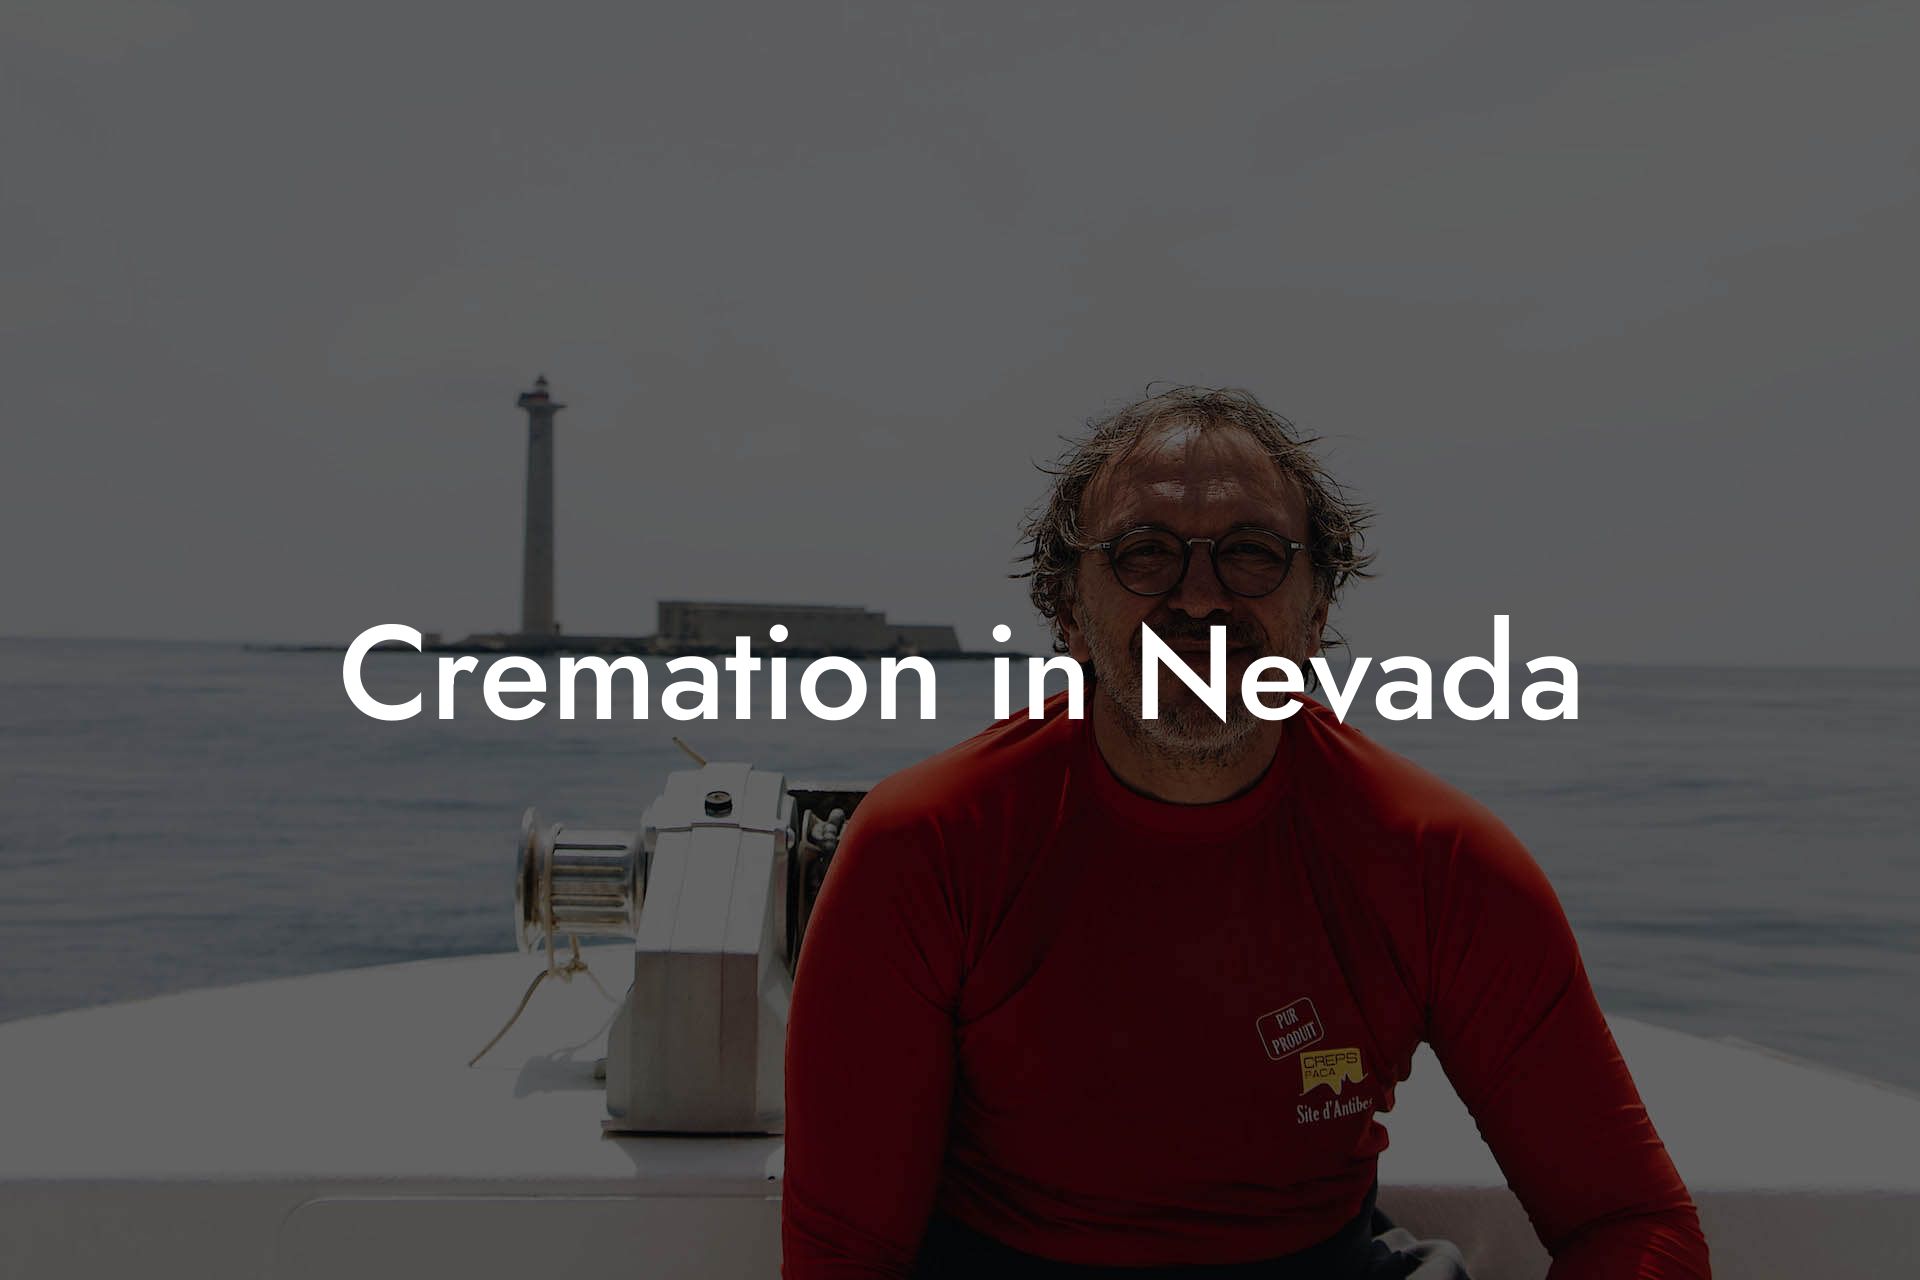 Cremation in Nevada